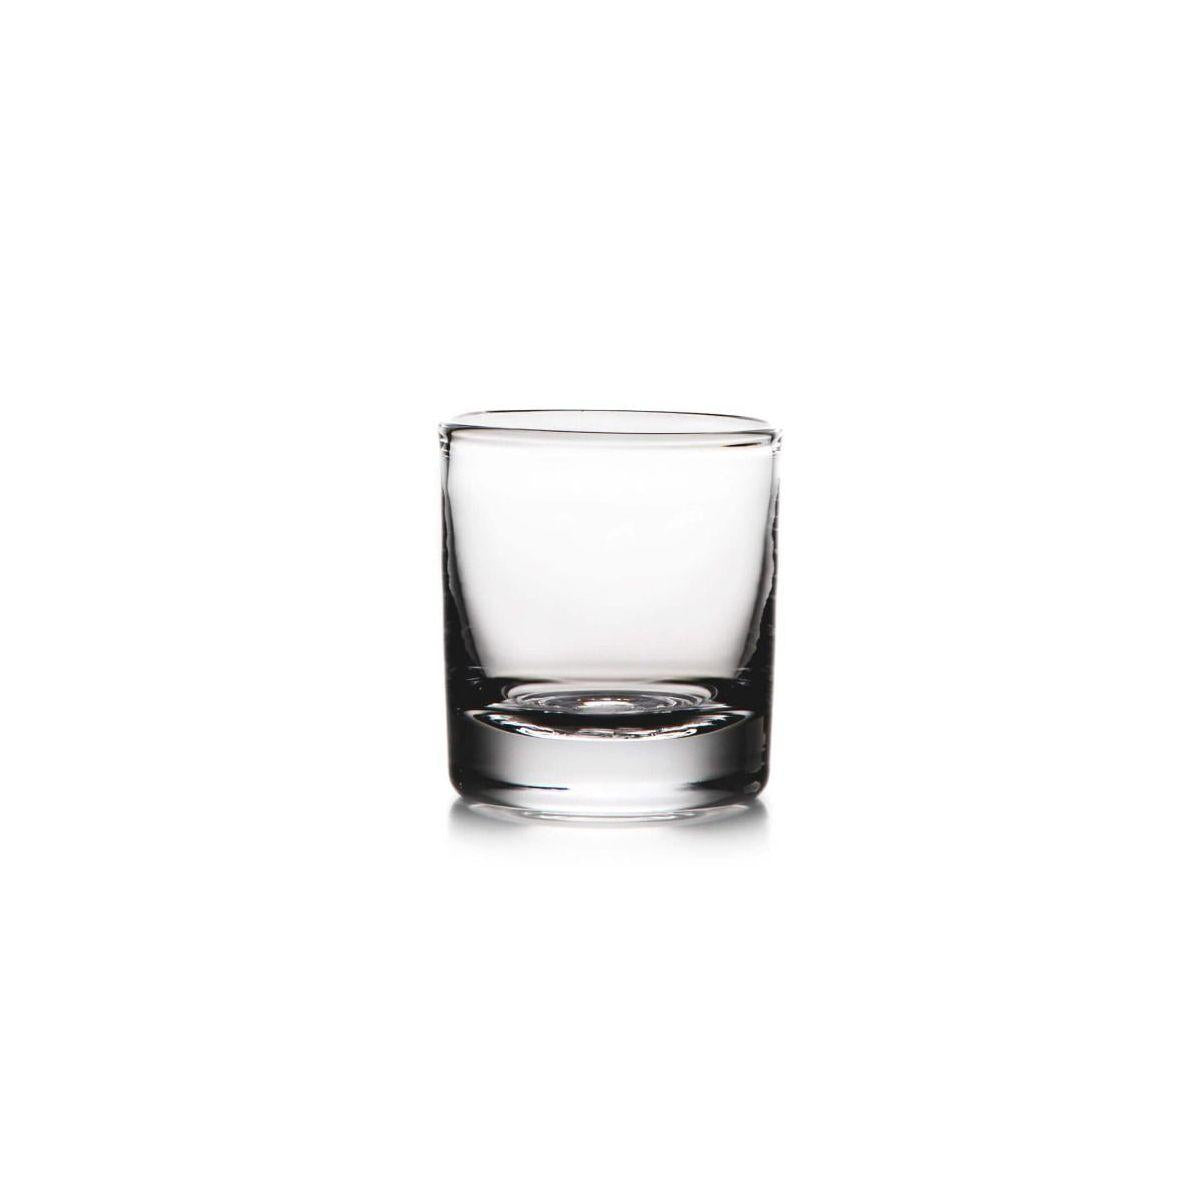 Ascutney Double Old-Fashioned Glass with Monogram